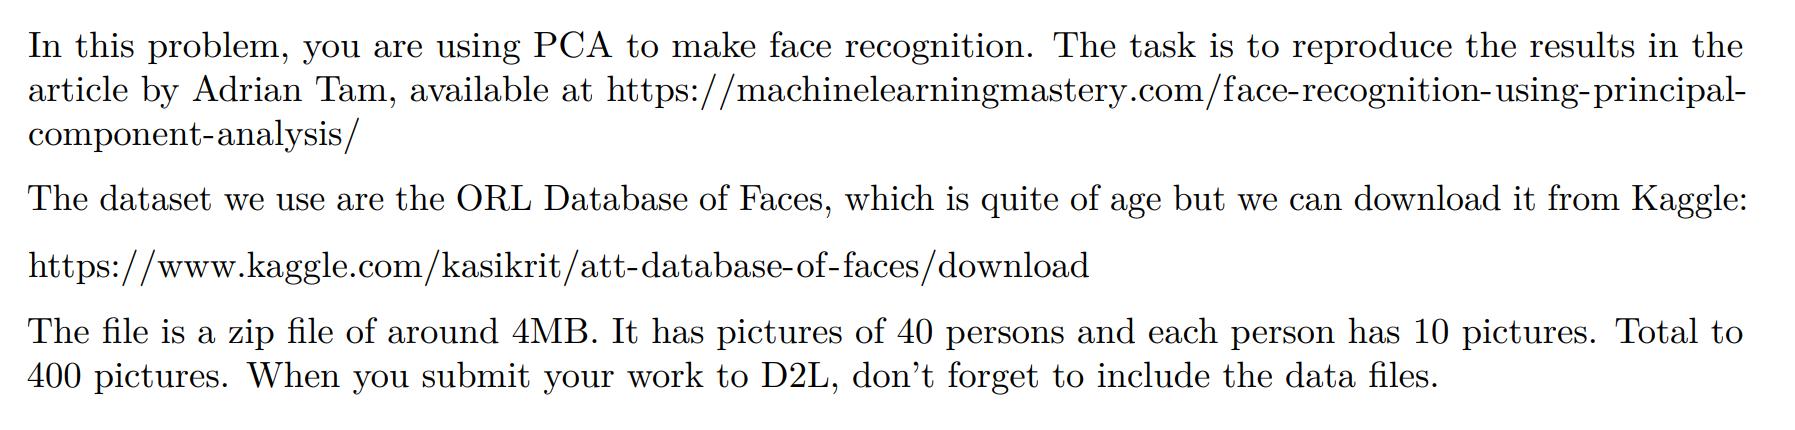 In this problem, you are using PCA to make face recognition. The task is to reproduce the results in the article by Adrian Ta